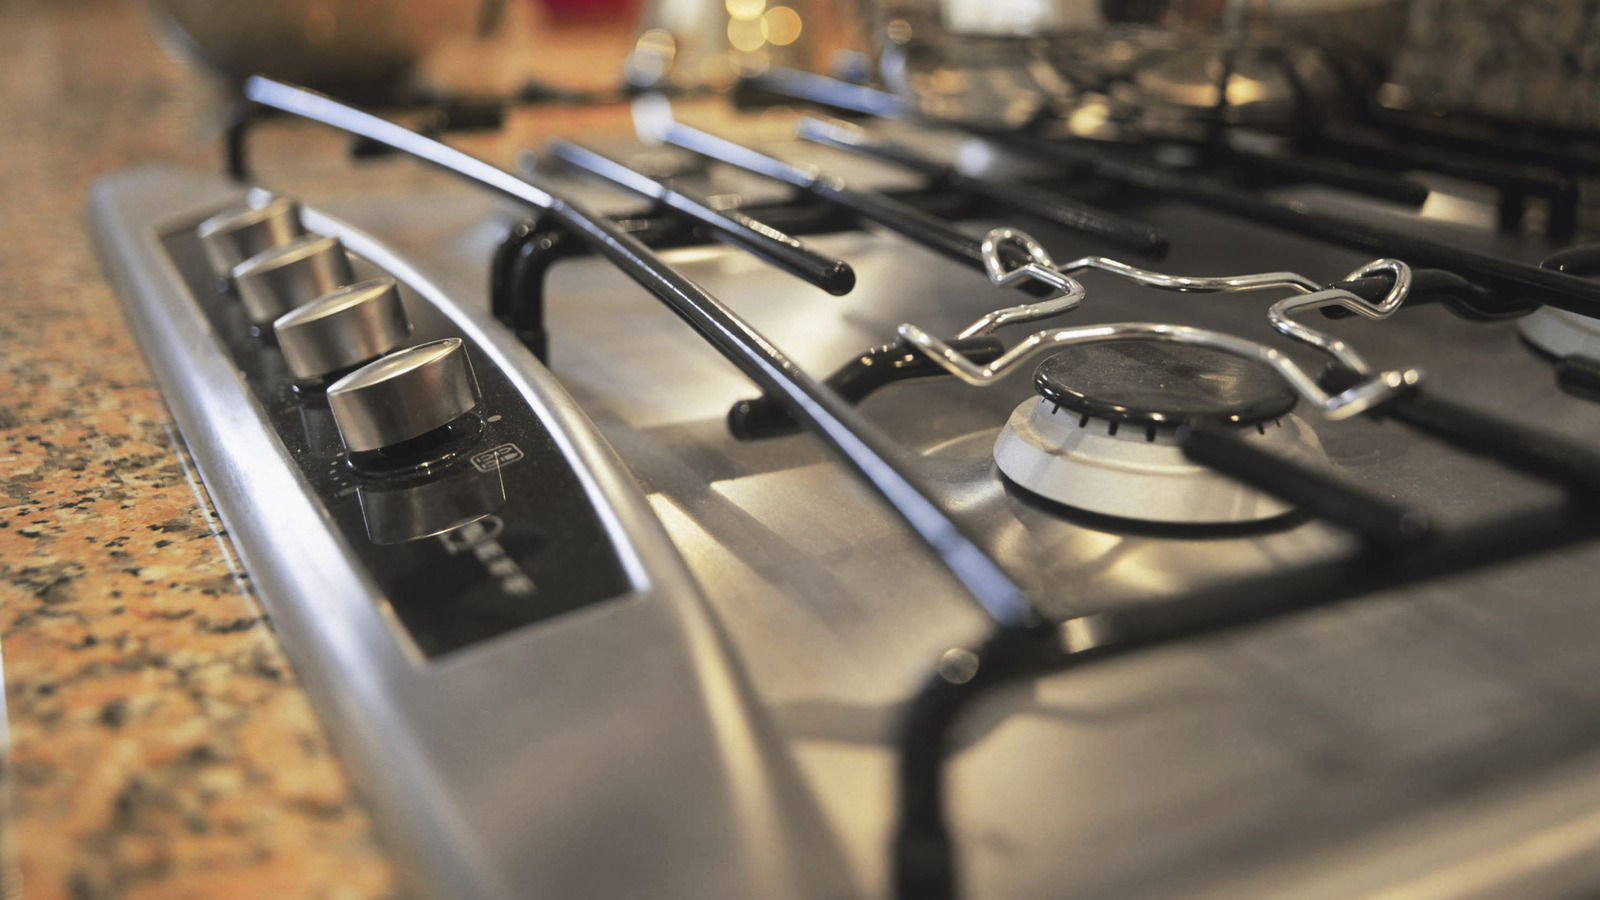 How To Clean Gas Stove Burners